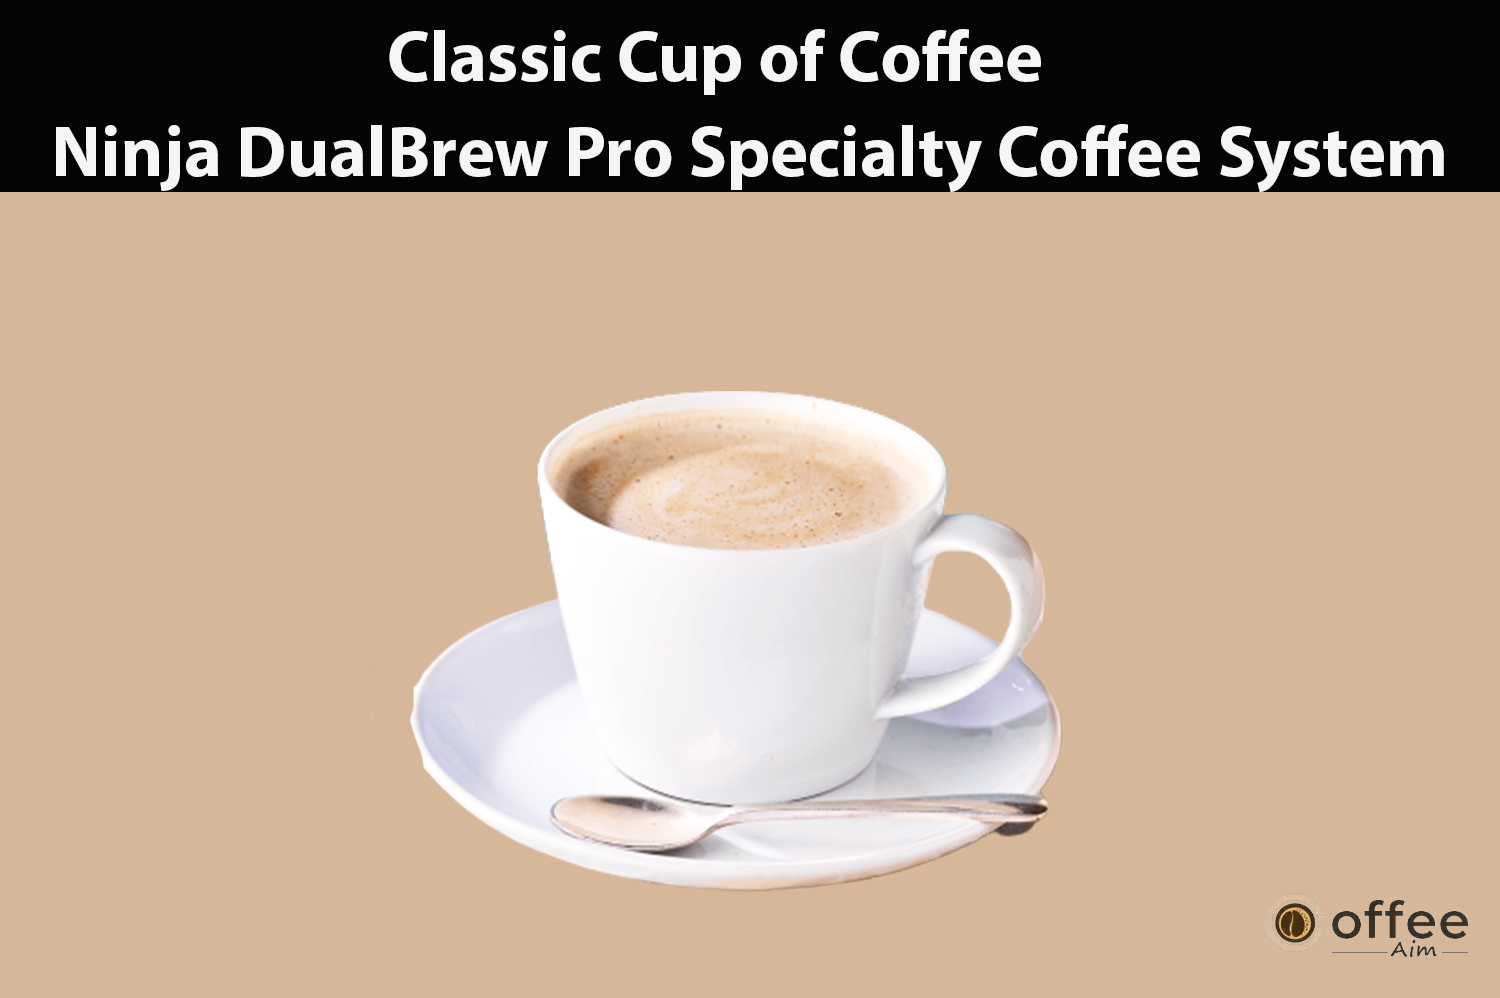 "This image showcases a classic cup of coffee made using the Ninja DualBrew Pro Specialty Coffee System, as featured in the article 'How to Use Ninja DualBrew Pro Specialty Coffee System, Compatible with K-Cup Pods, and 12-Cup Drip Coffee Maker'."